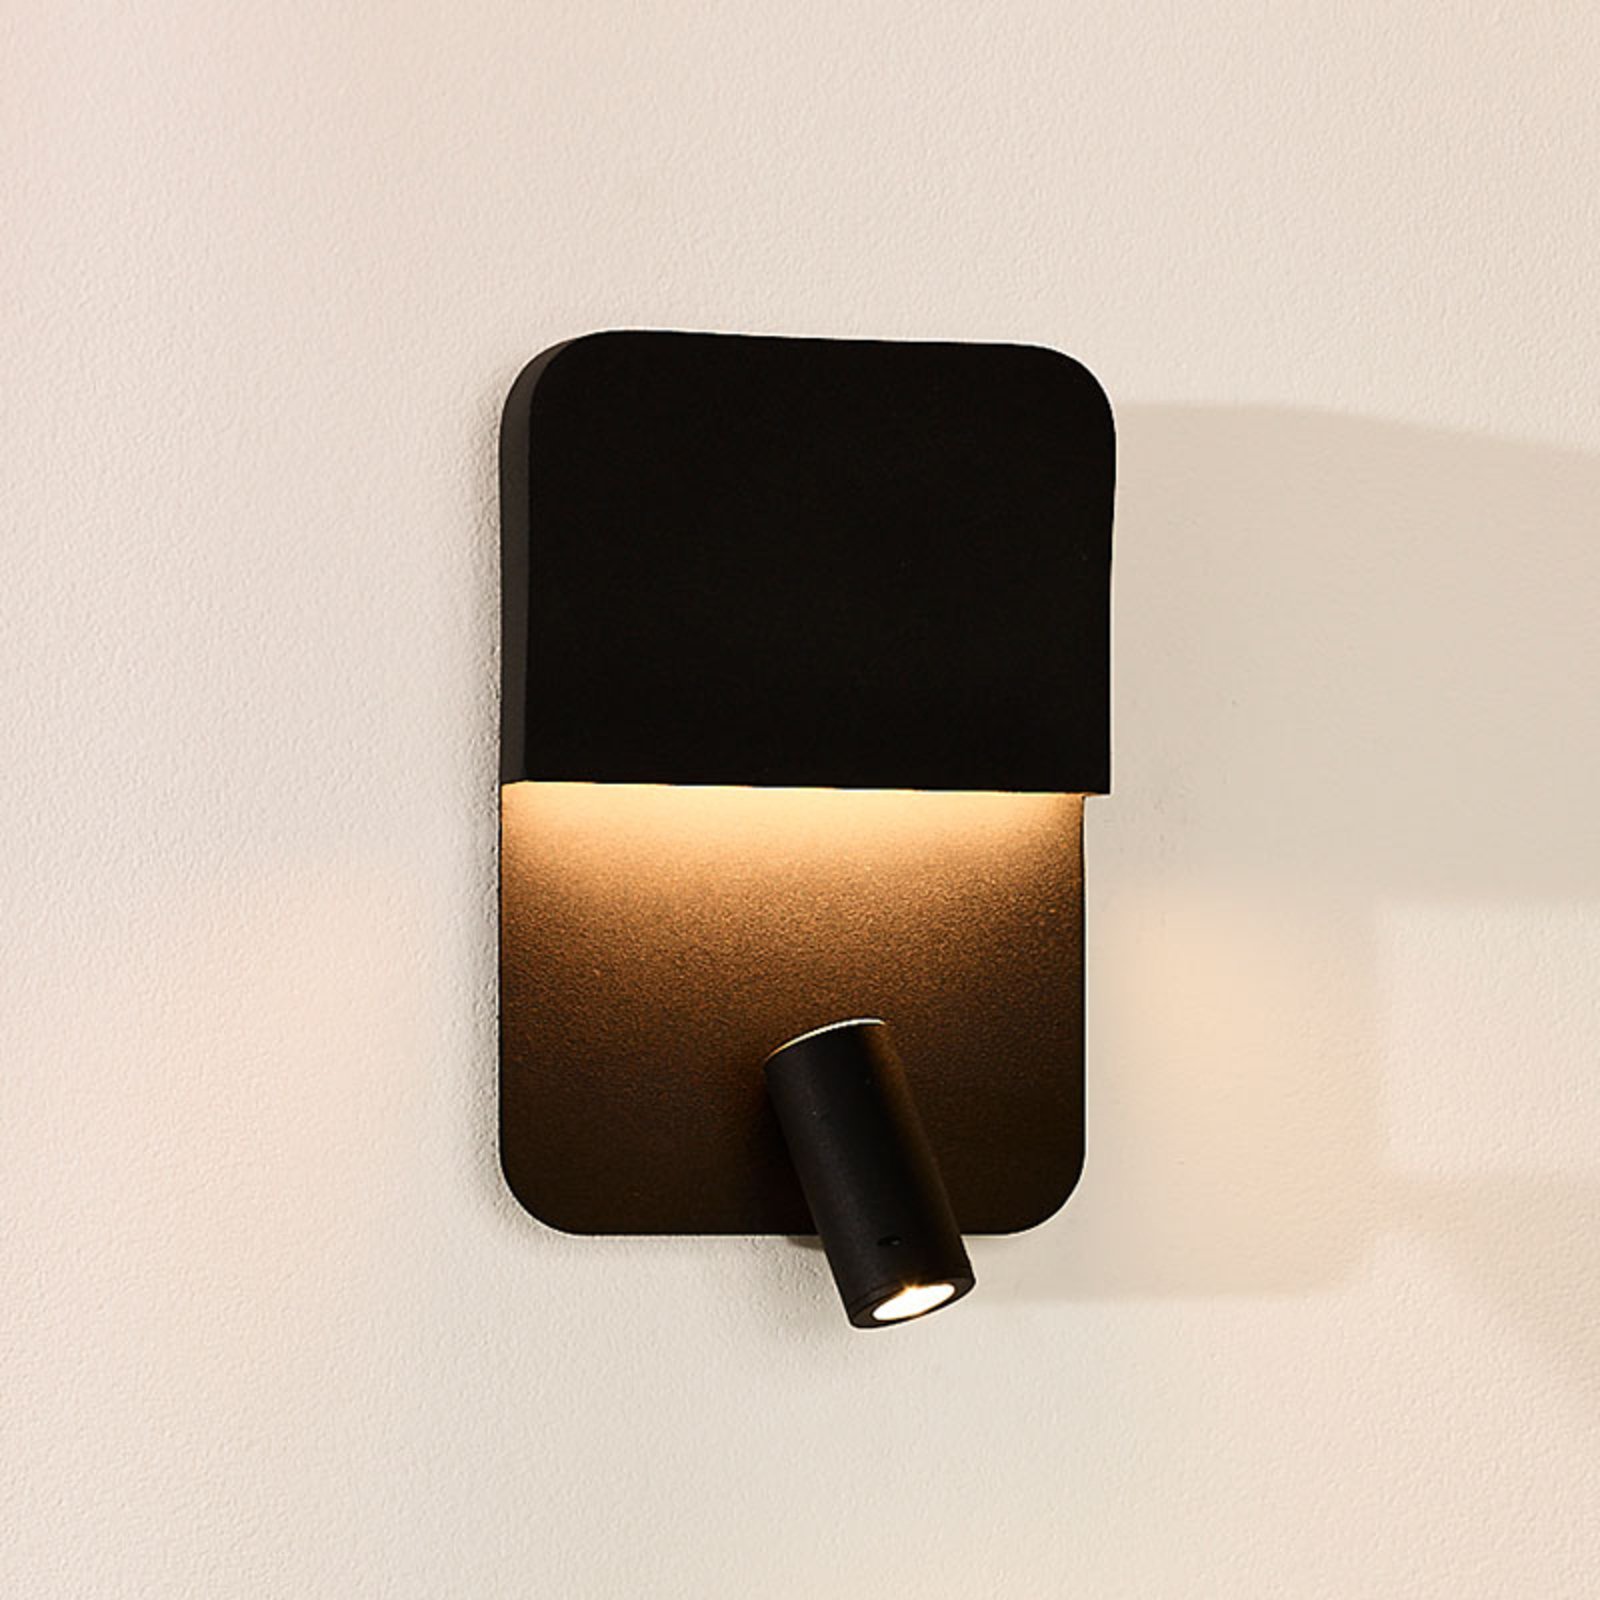 Boxer LED wall light with spot, black